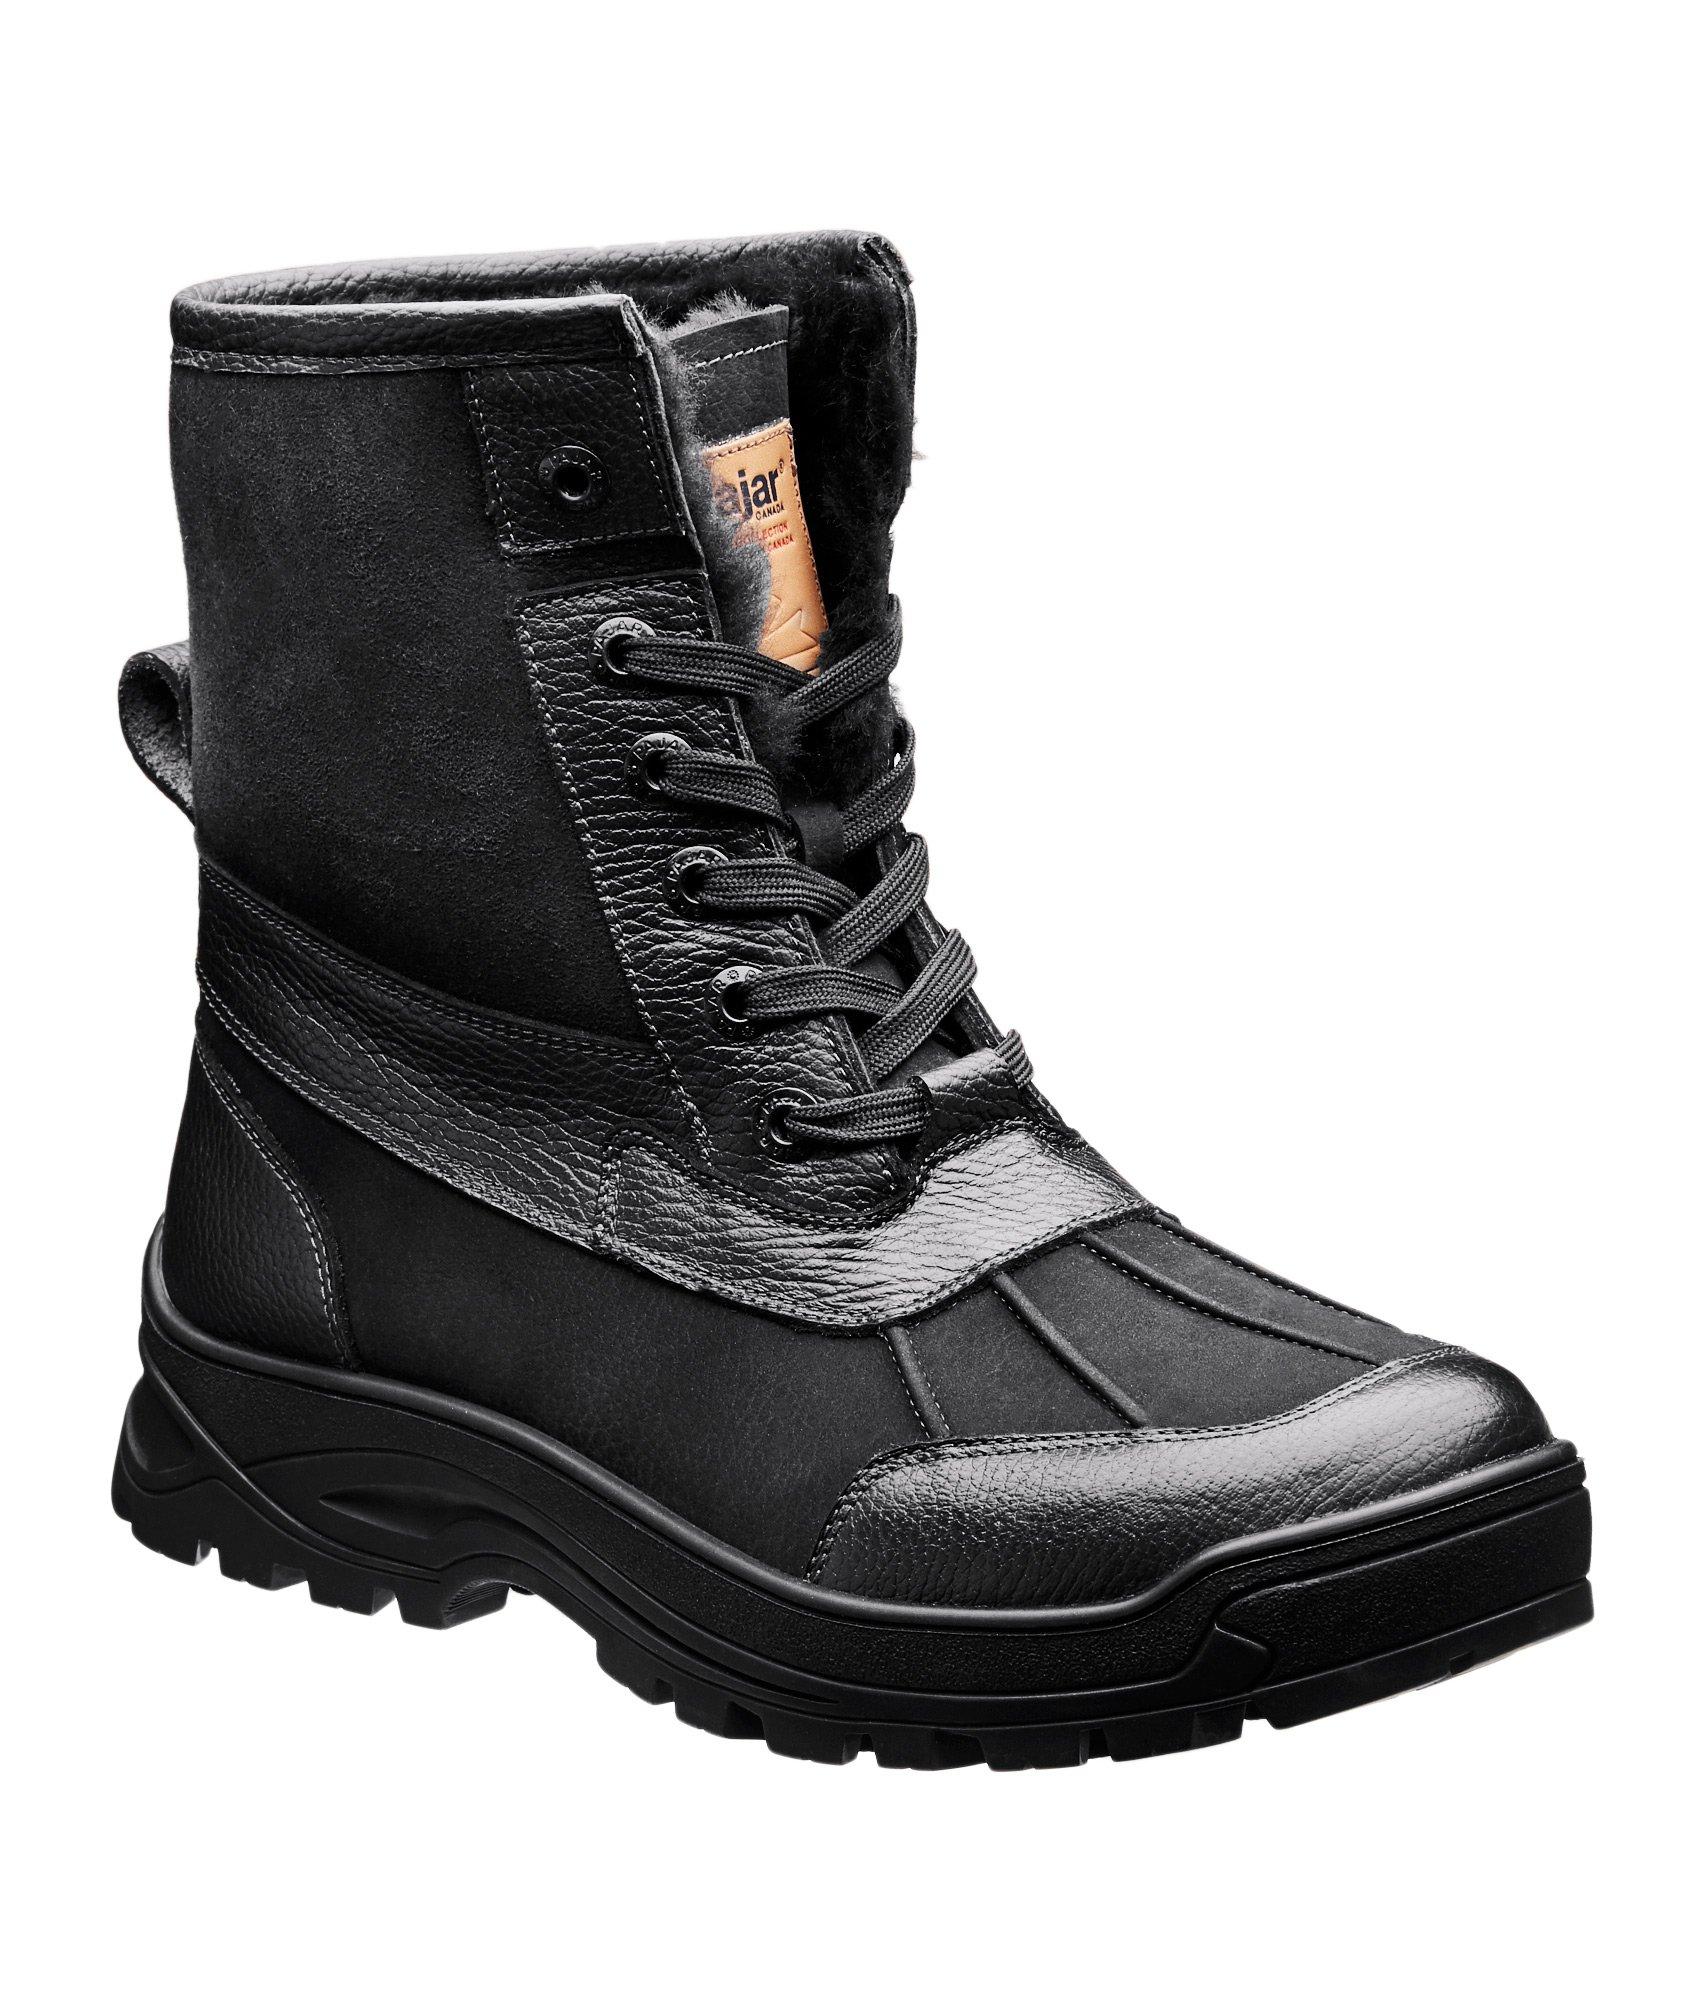 Waterproof Suede Leather Ice Grip Boots image 0